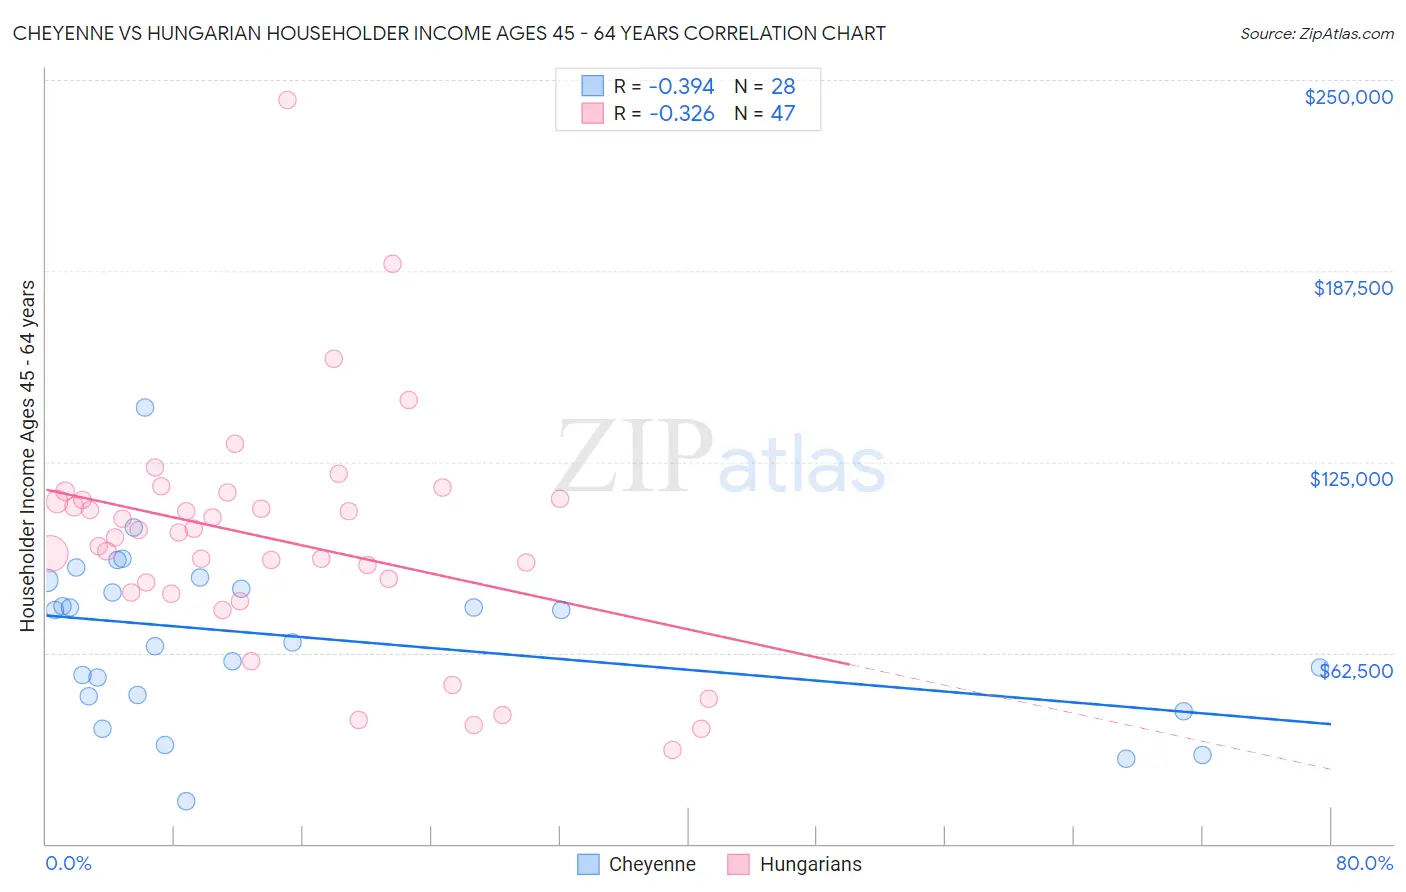 Cheyenne vs Hungarian Householder Income Ages 45 - 64 years